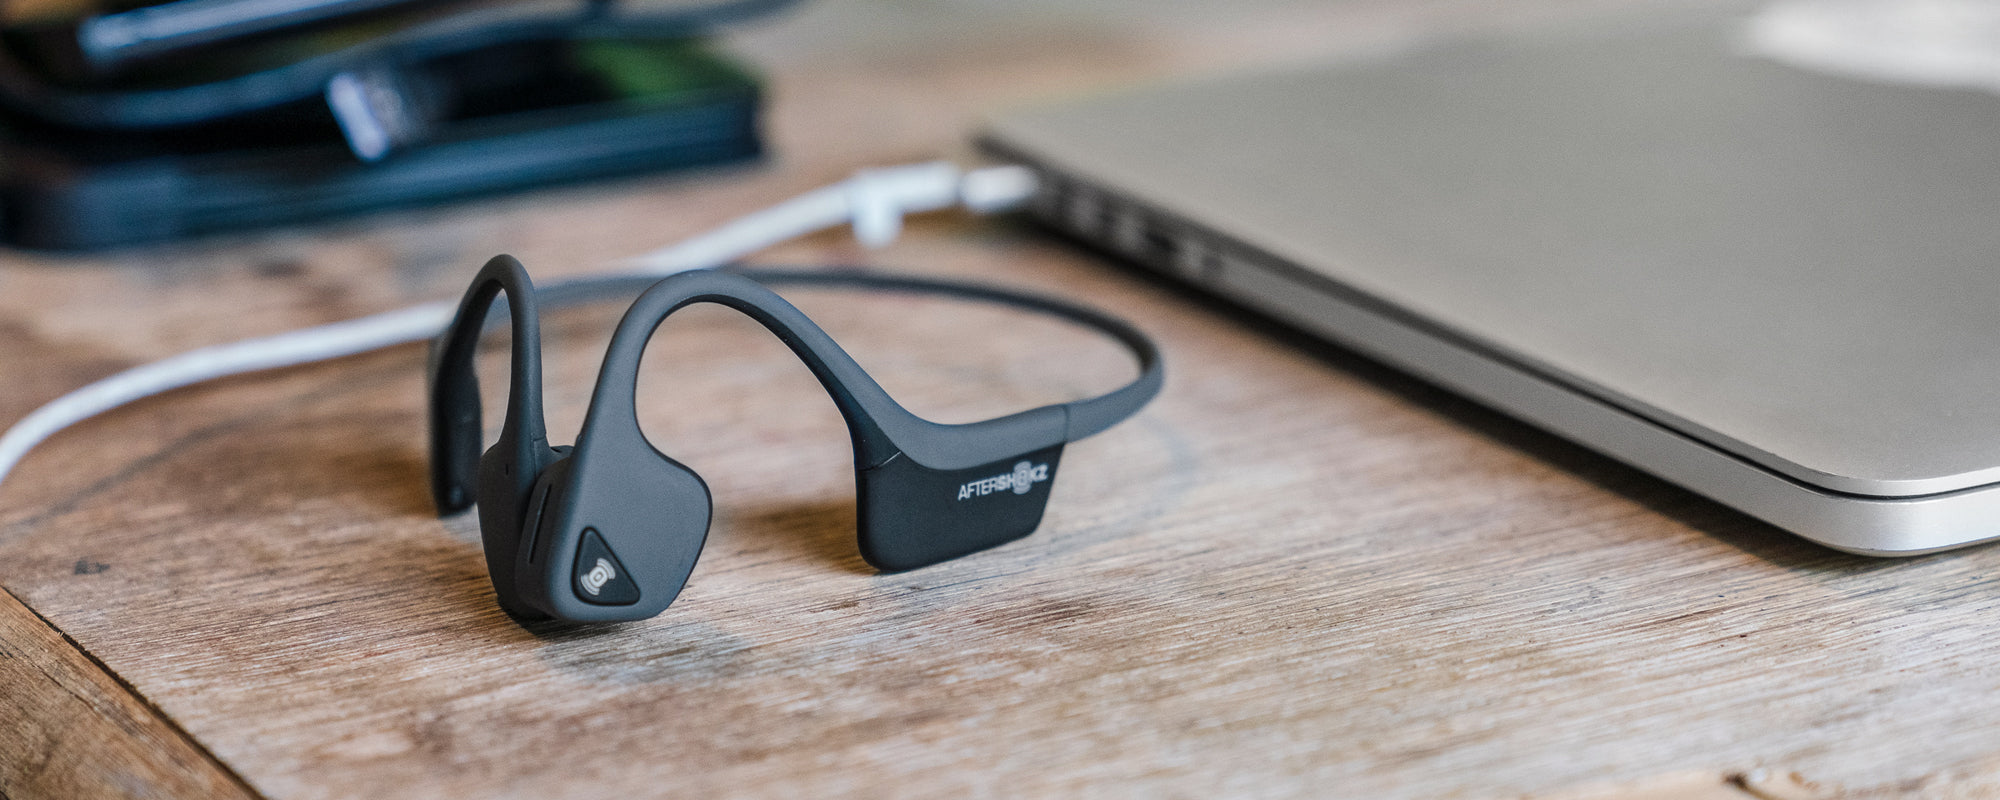 Pros & Cons of Downloading and Streaming Music with Your AfterShokz